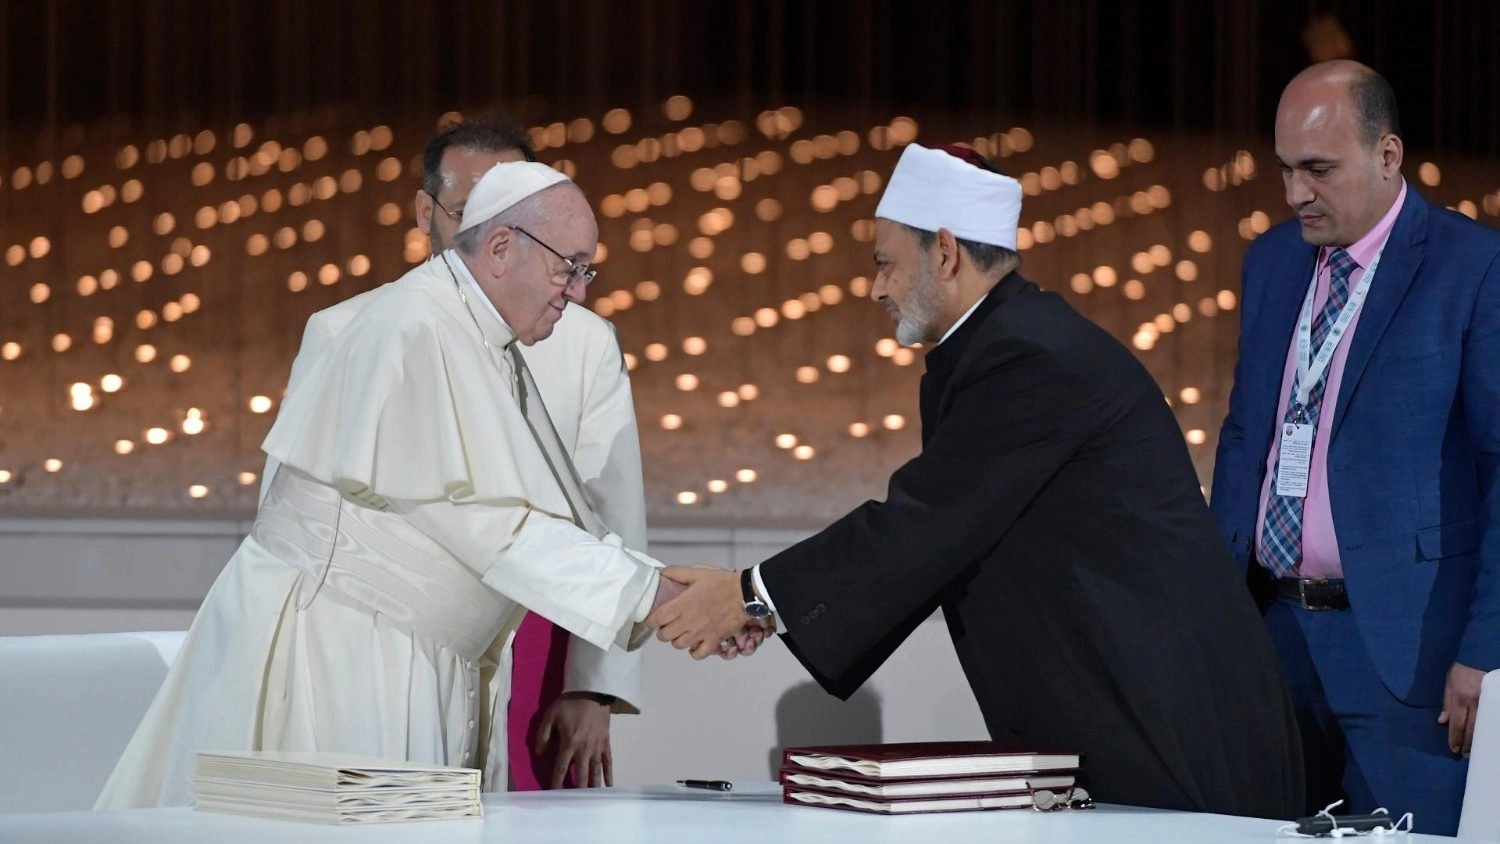 Pope Francis shakes hands with the Grand Imam of Al-Azhar, Ahmed el-Tayeb